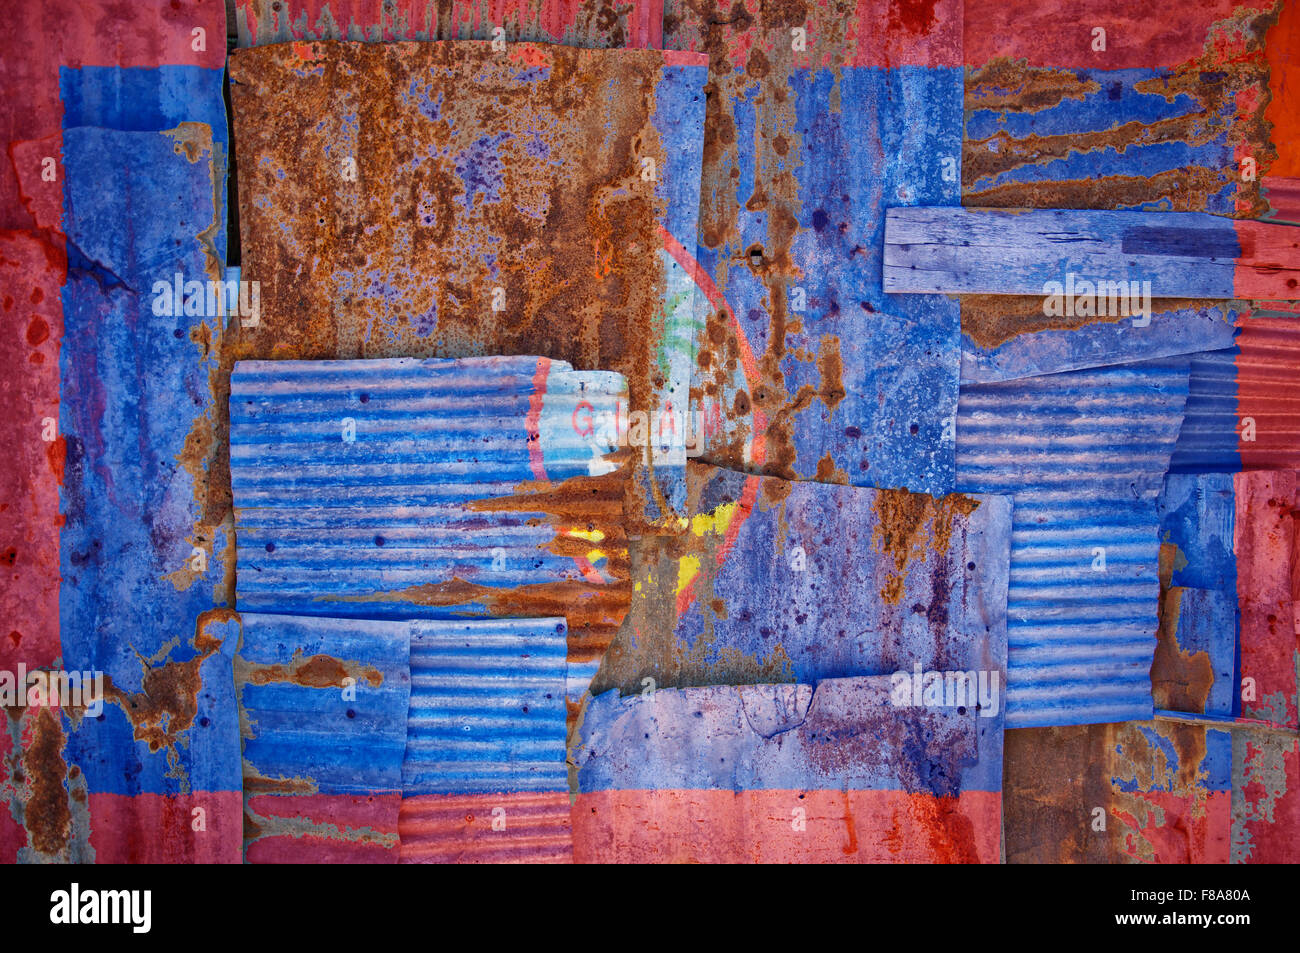 An abstract background image of the flag of Guam painted on to rusty corrugated iron sheets overlapping to form a wall or fence. Stock Photo